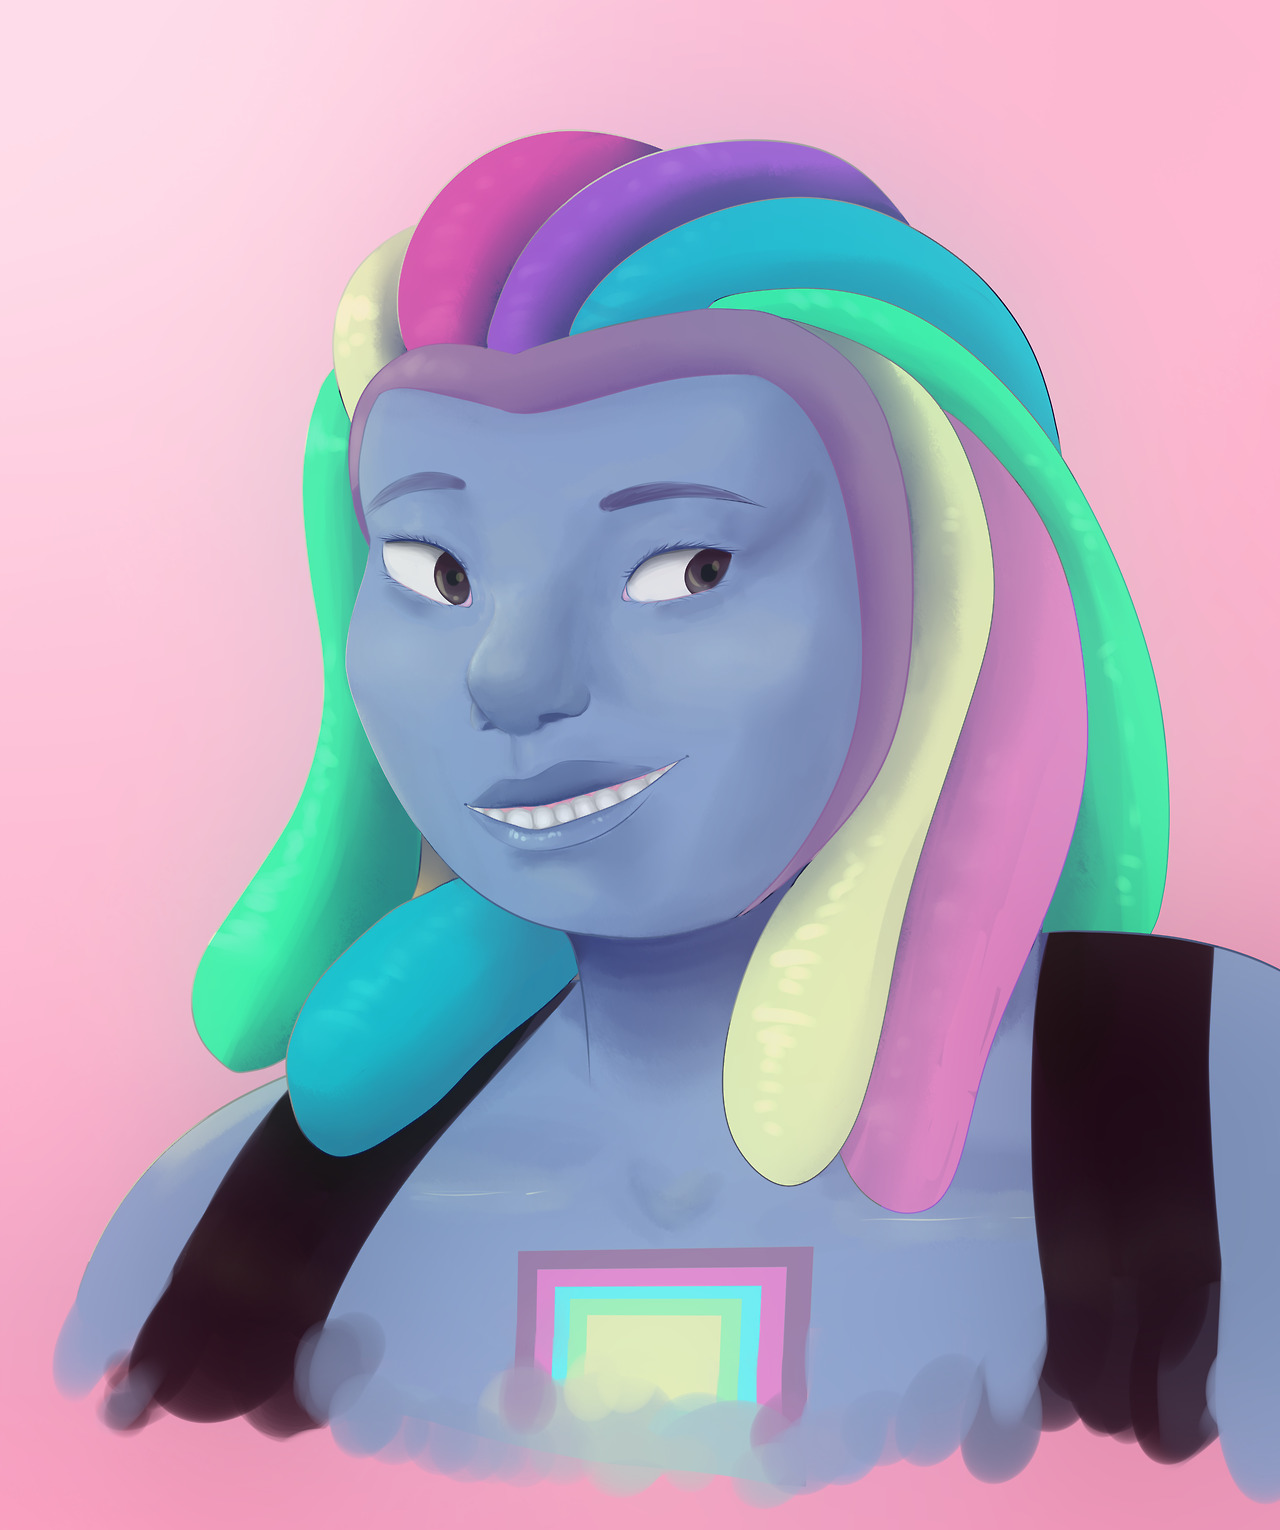 the new stevenbomb is some serious bismuth